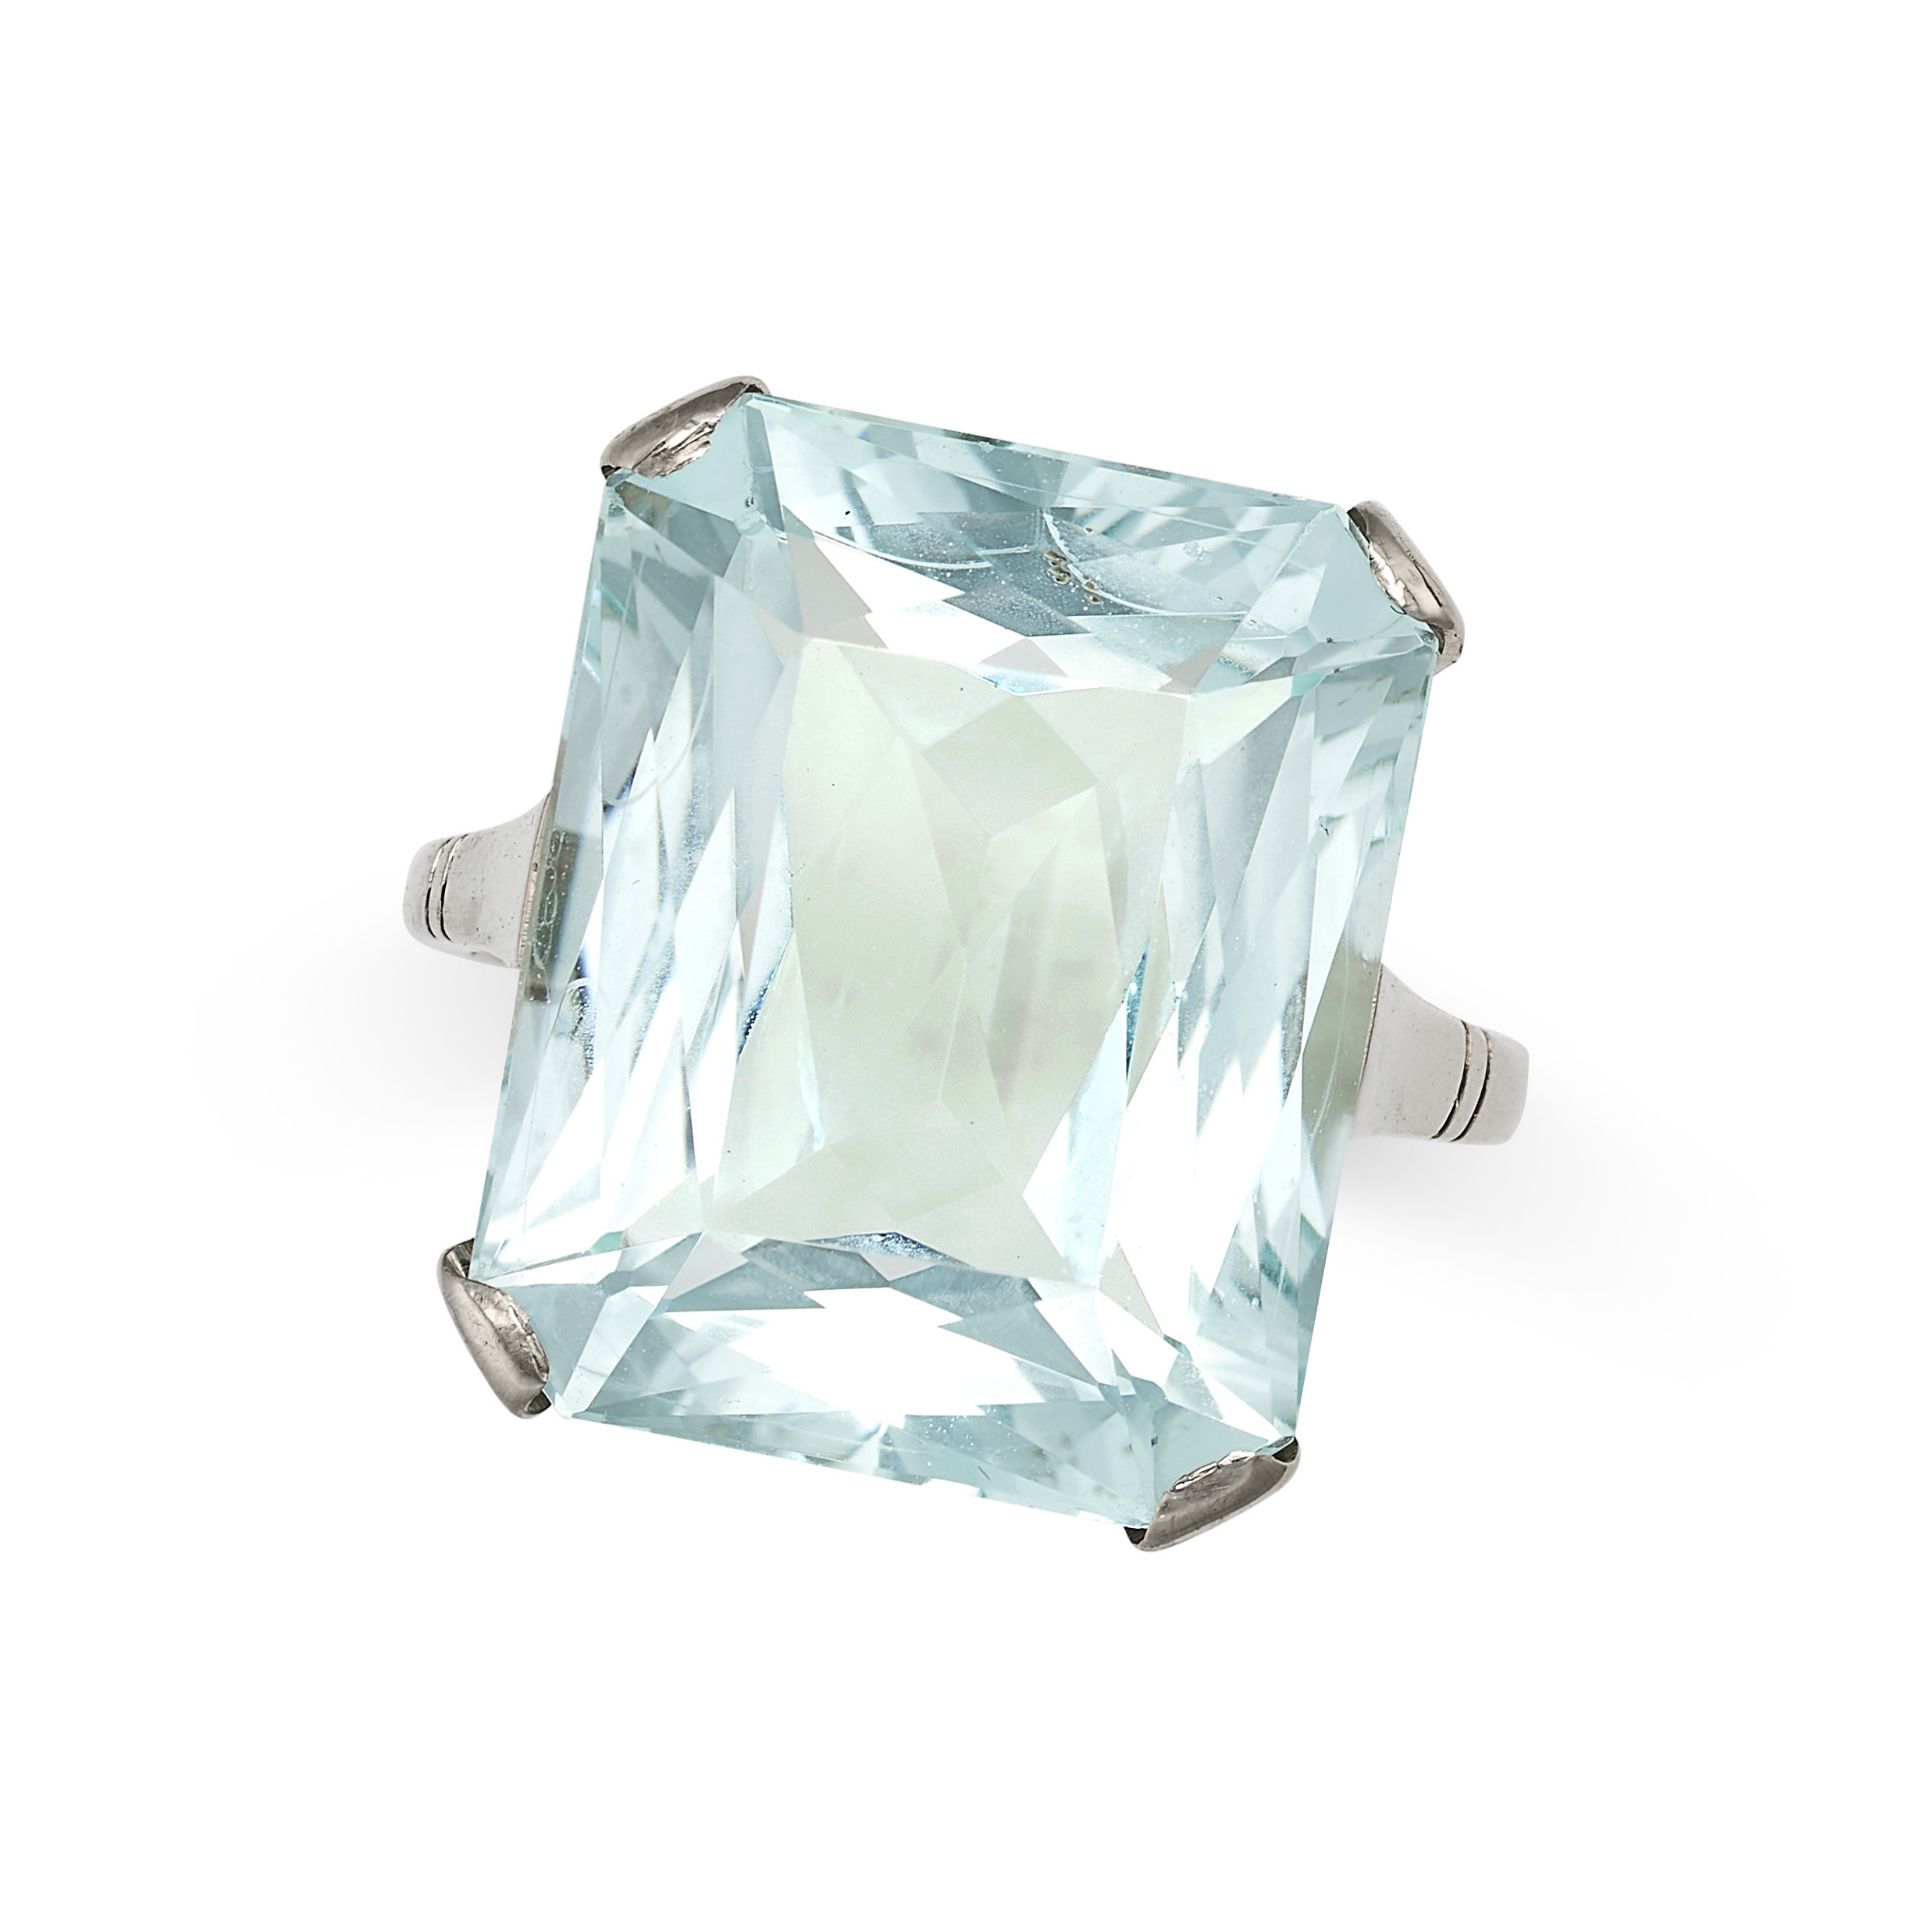 AN AQUAMARINE RING in 14ct white gold, set with an octagonal mixed cut aquamarine of approximatel...